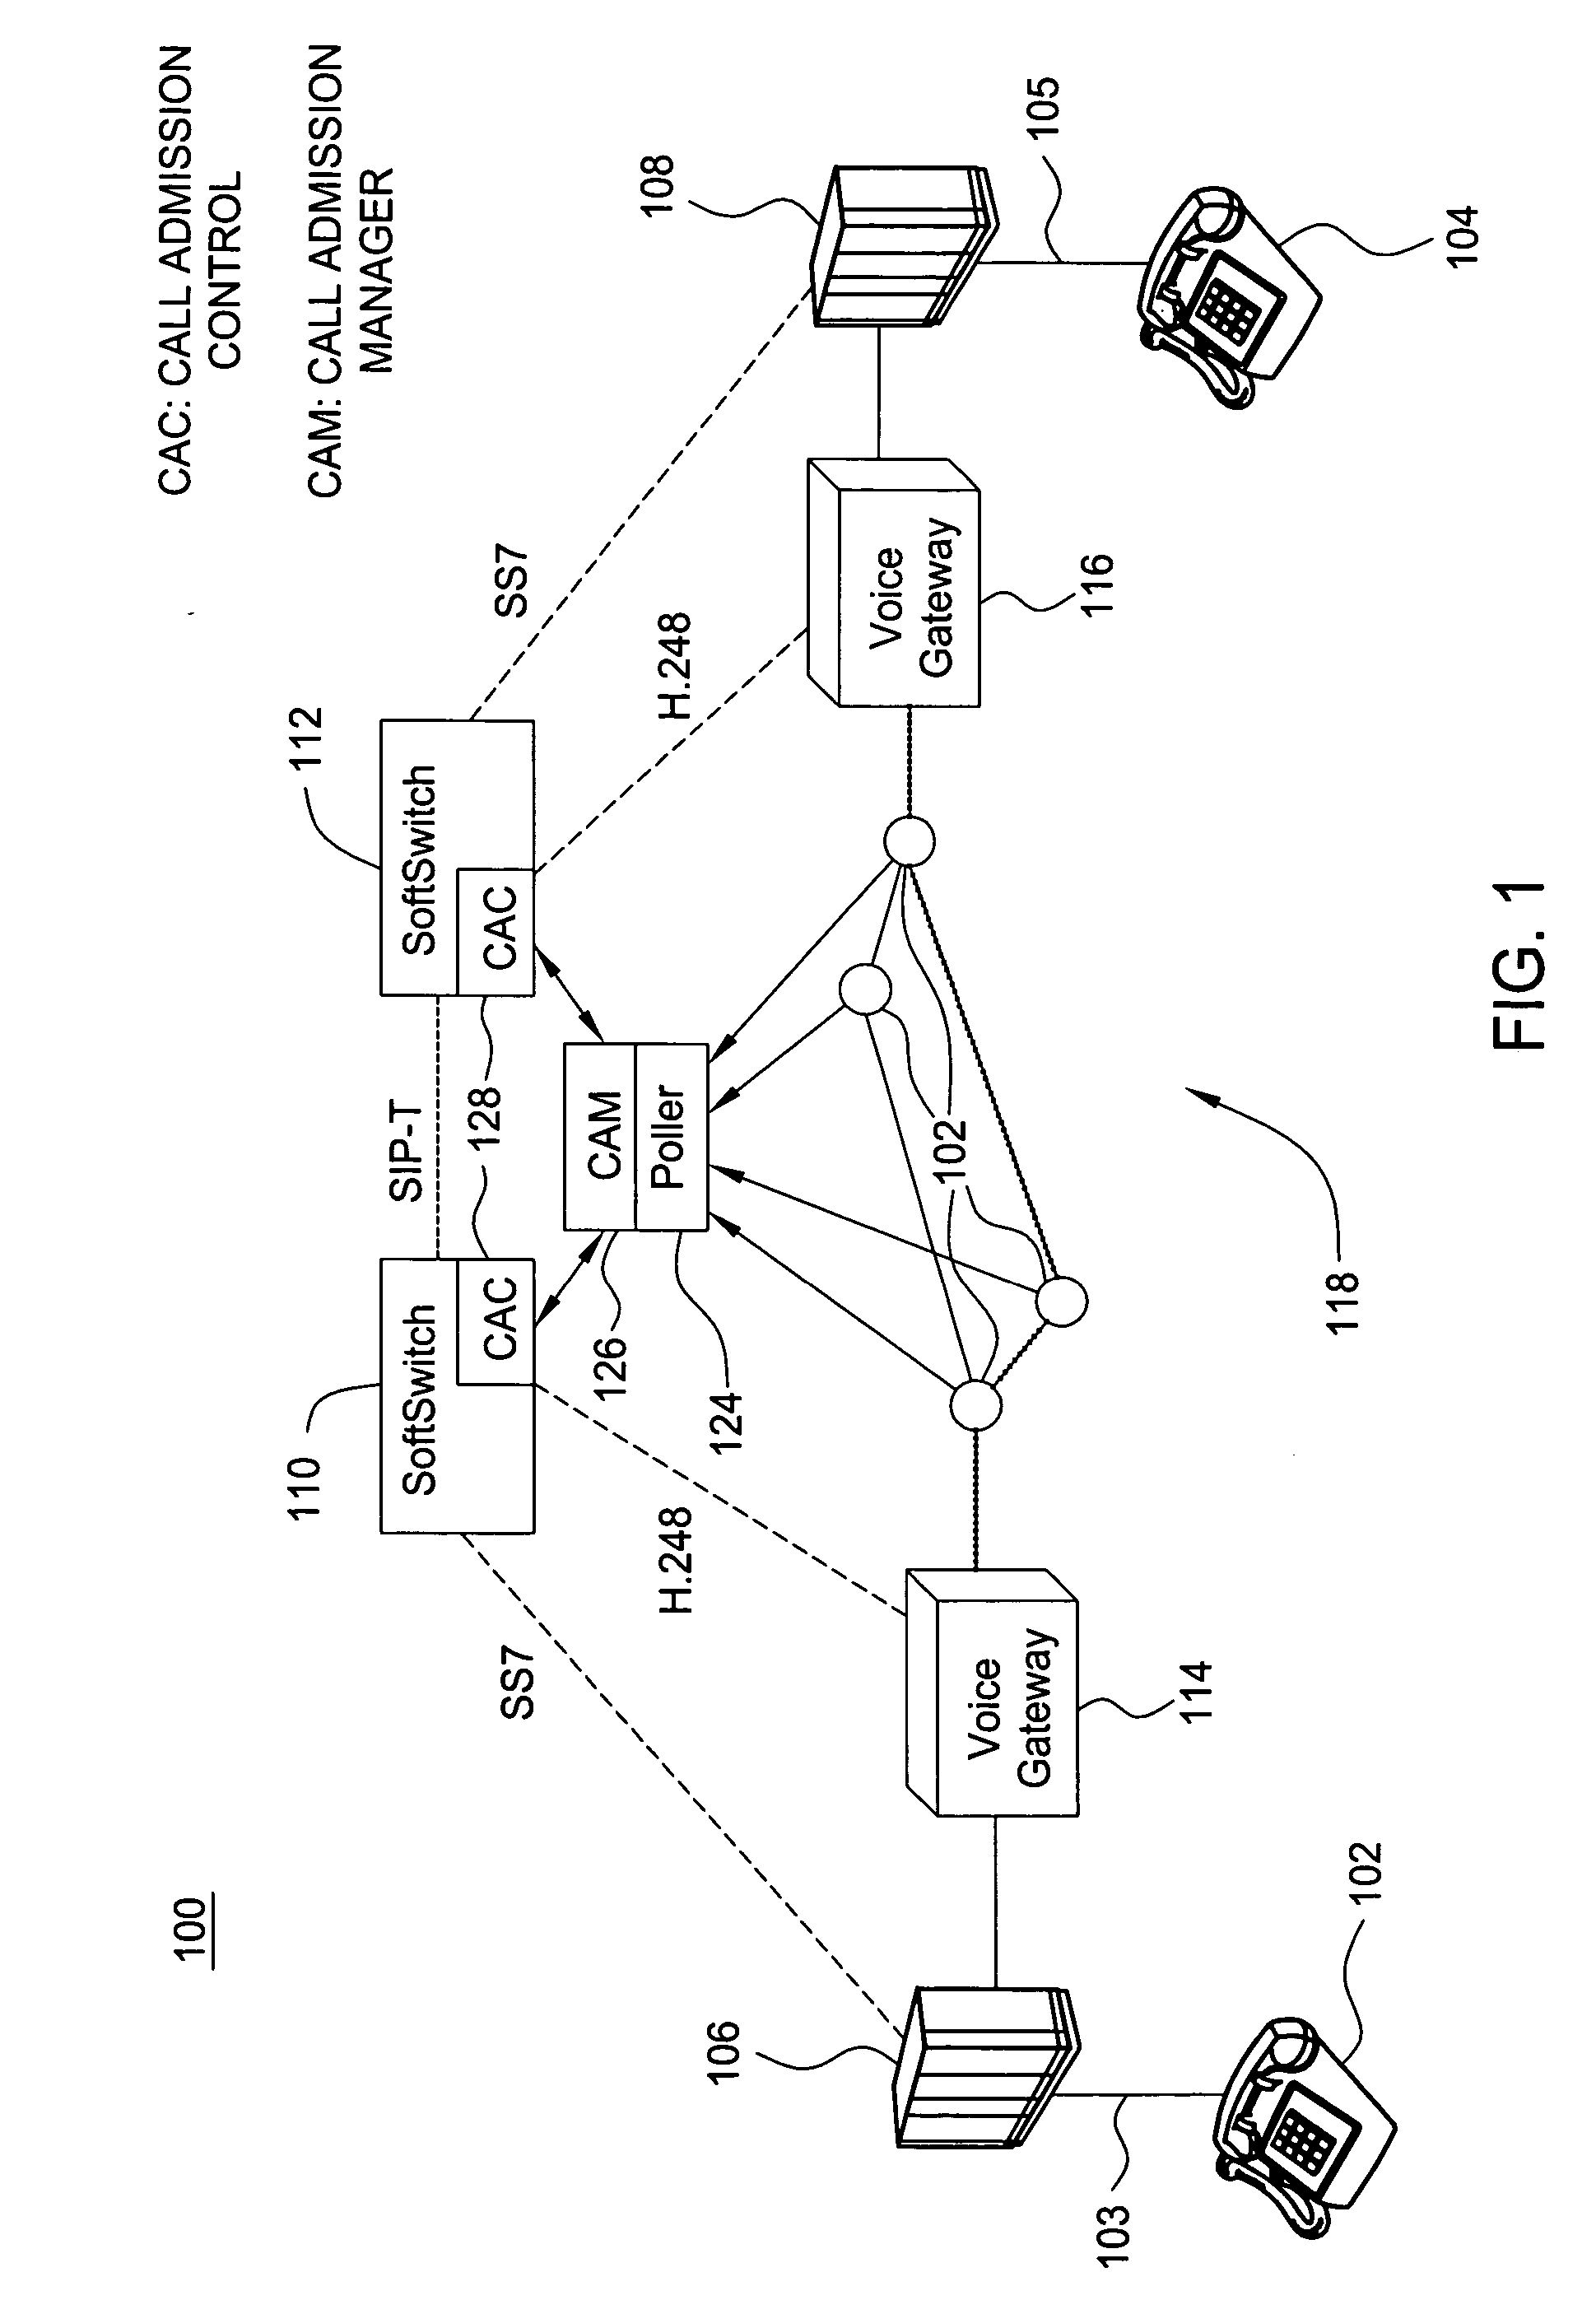 Method for management of voice-over IP communications